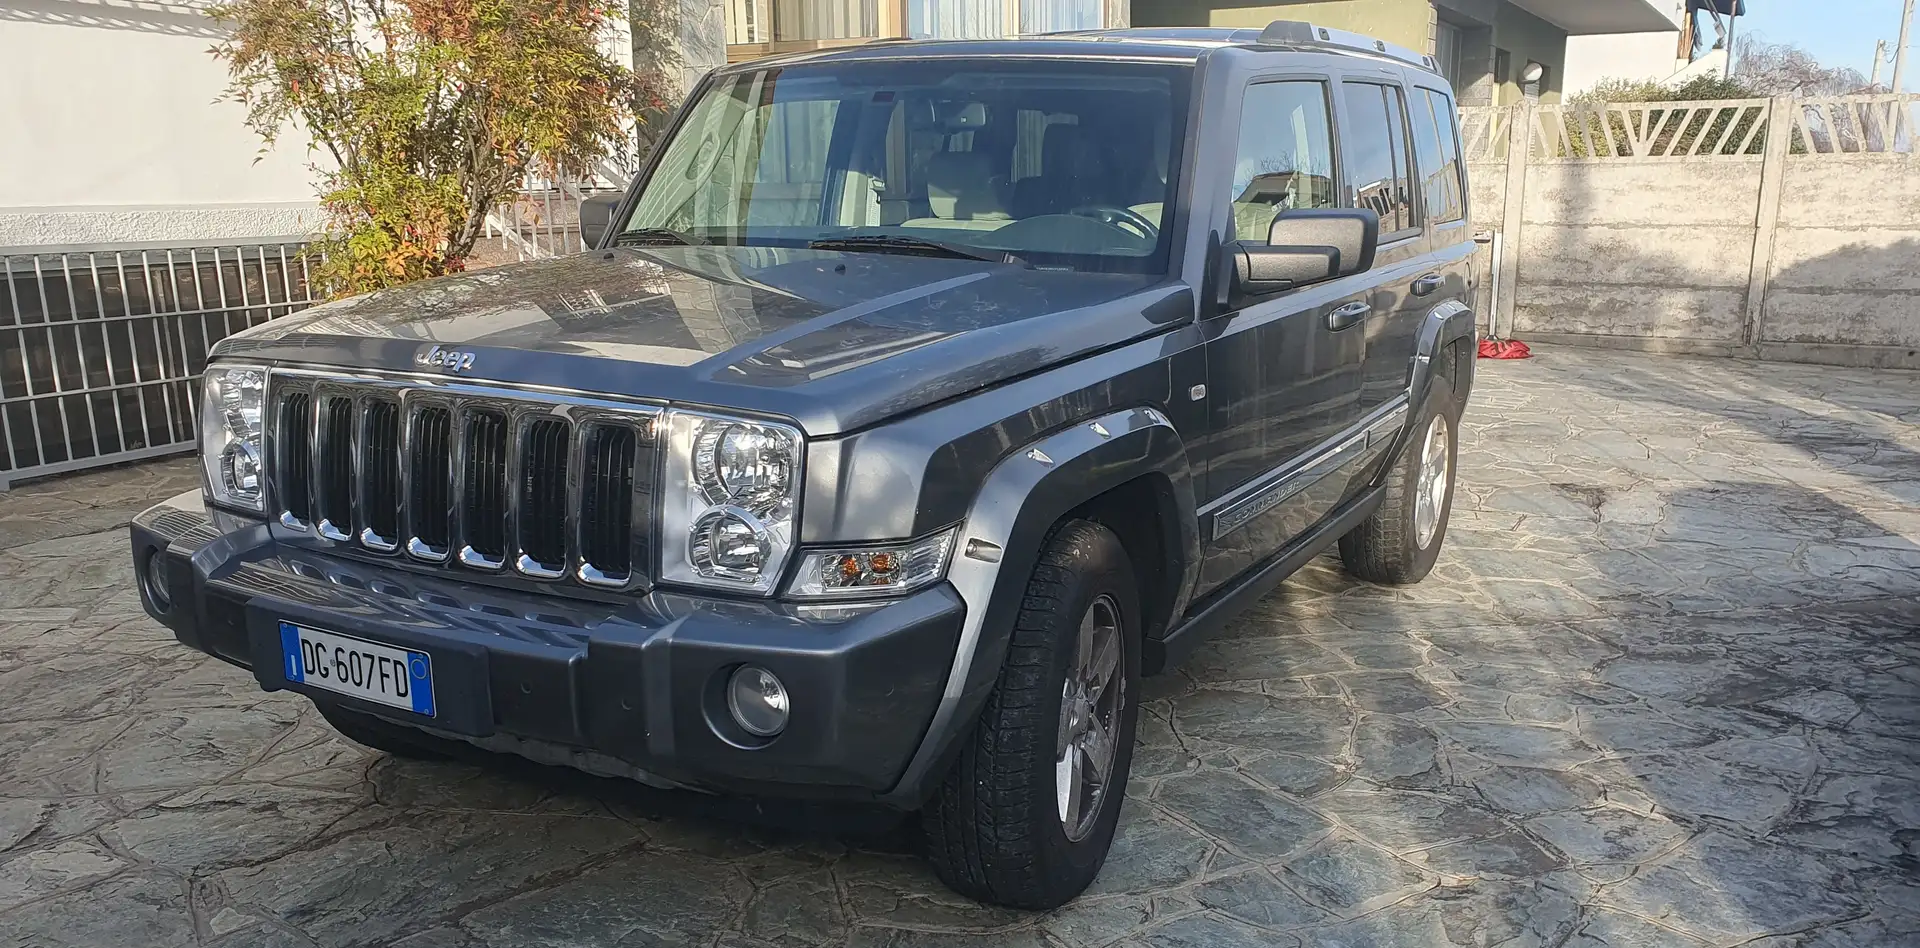 Jeep Commander Commander 3.0 V6 crd Limited auto Argent - 1